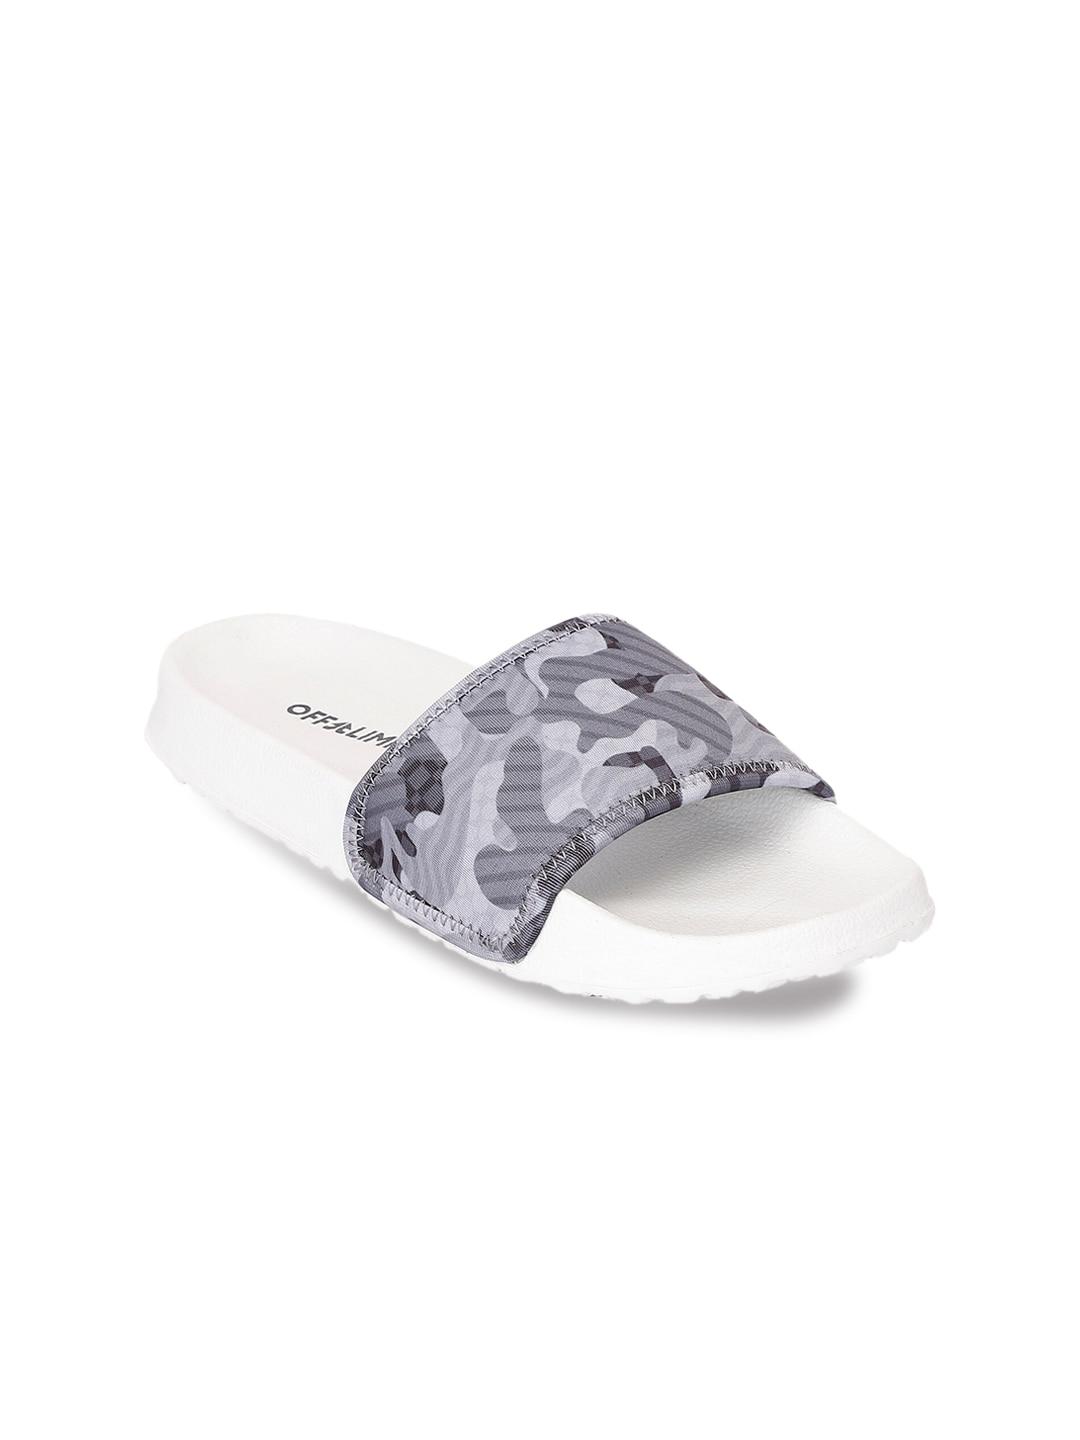 off limits women grey & white camouflage printed sliders